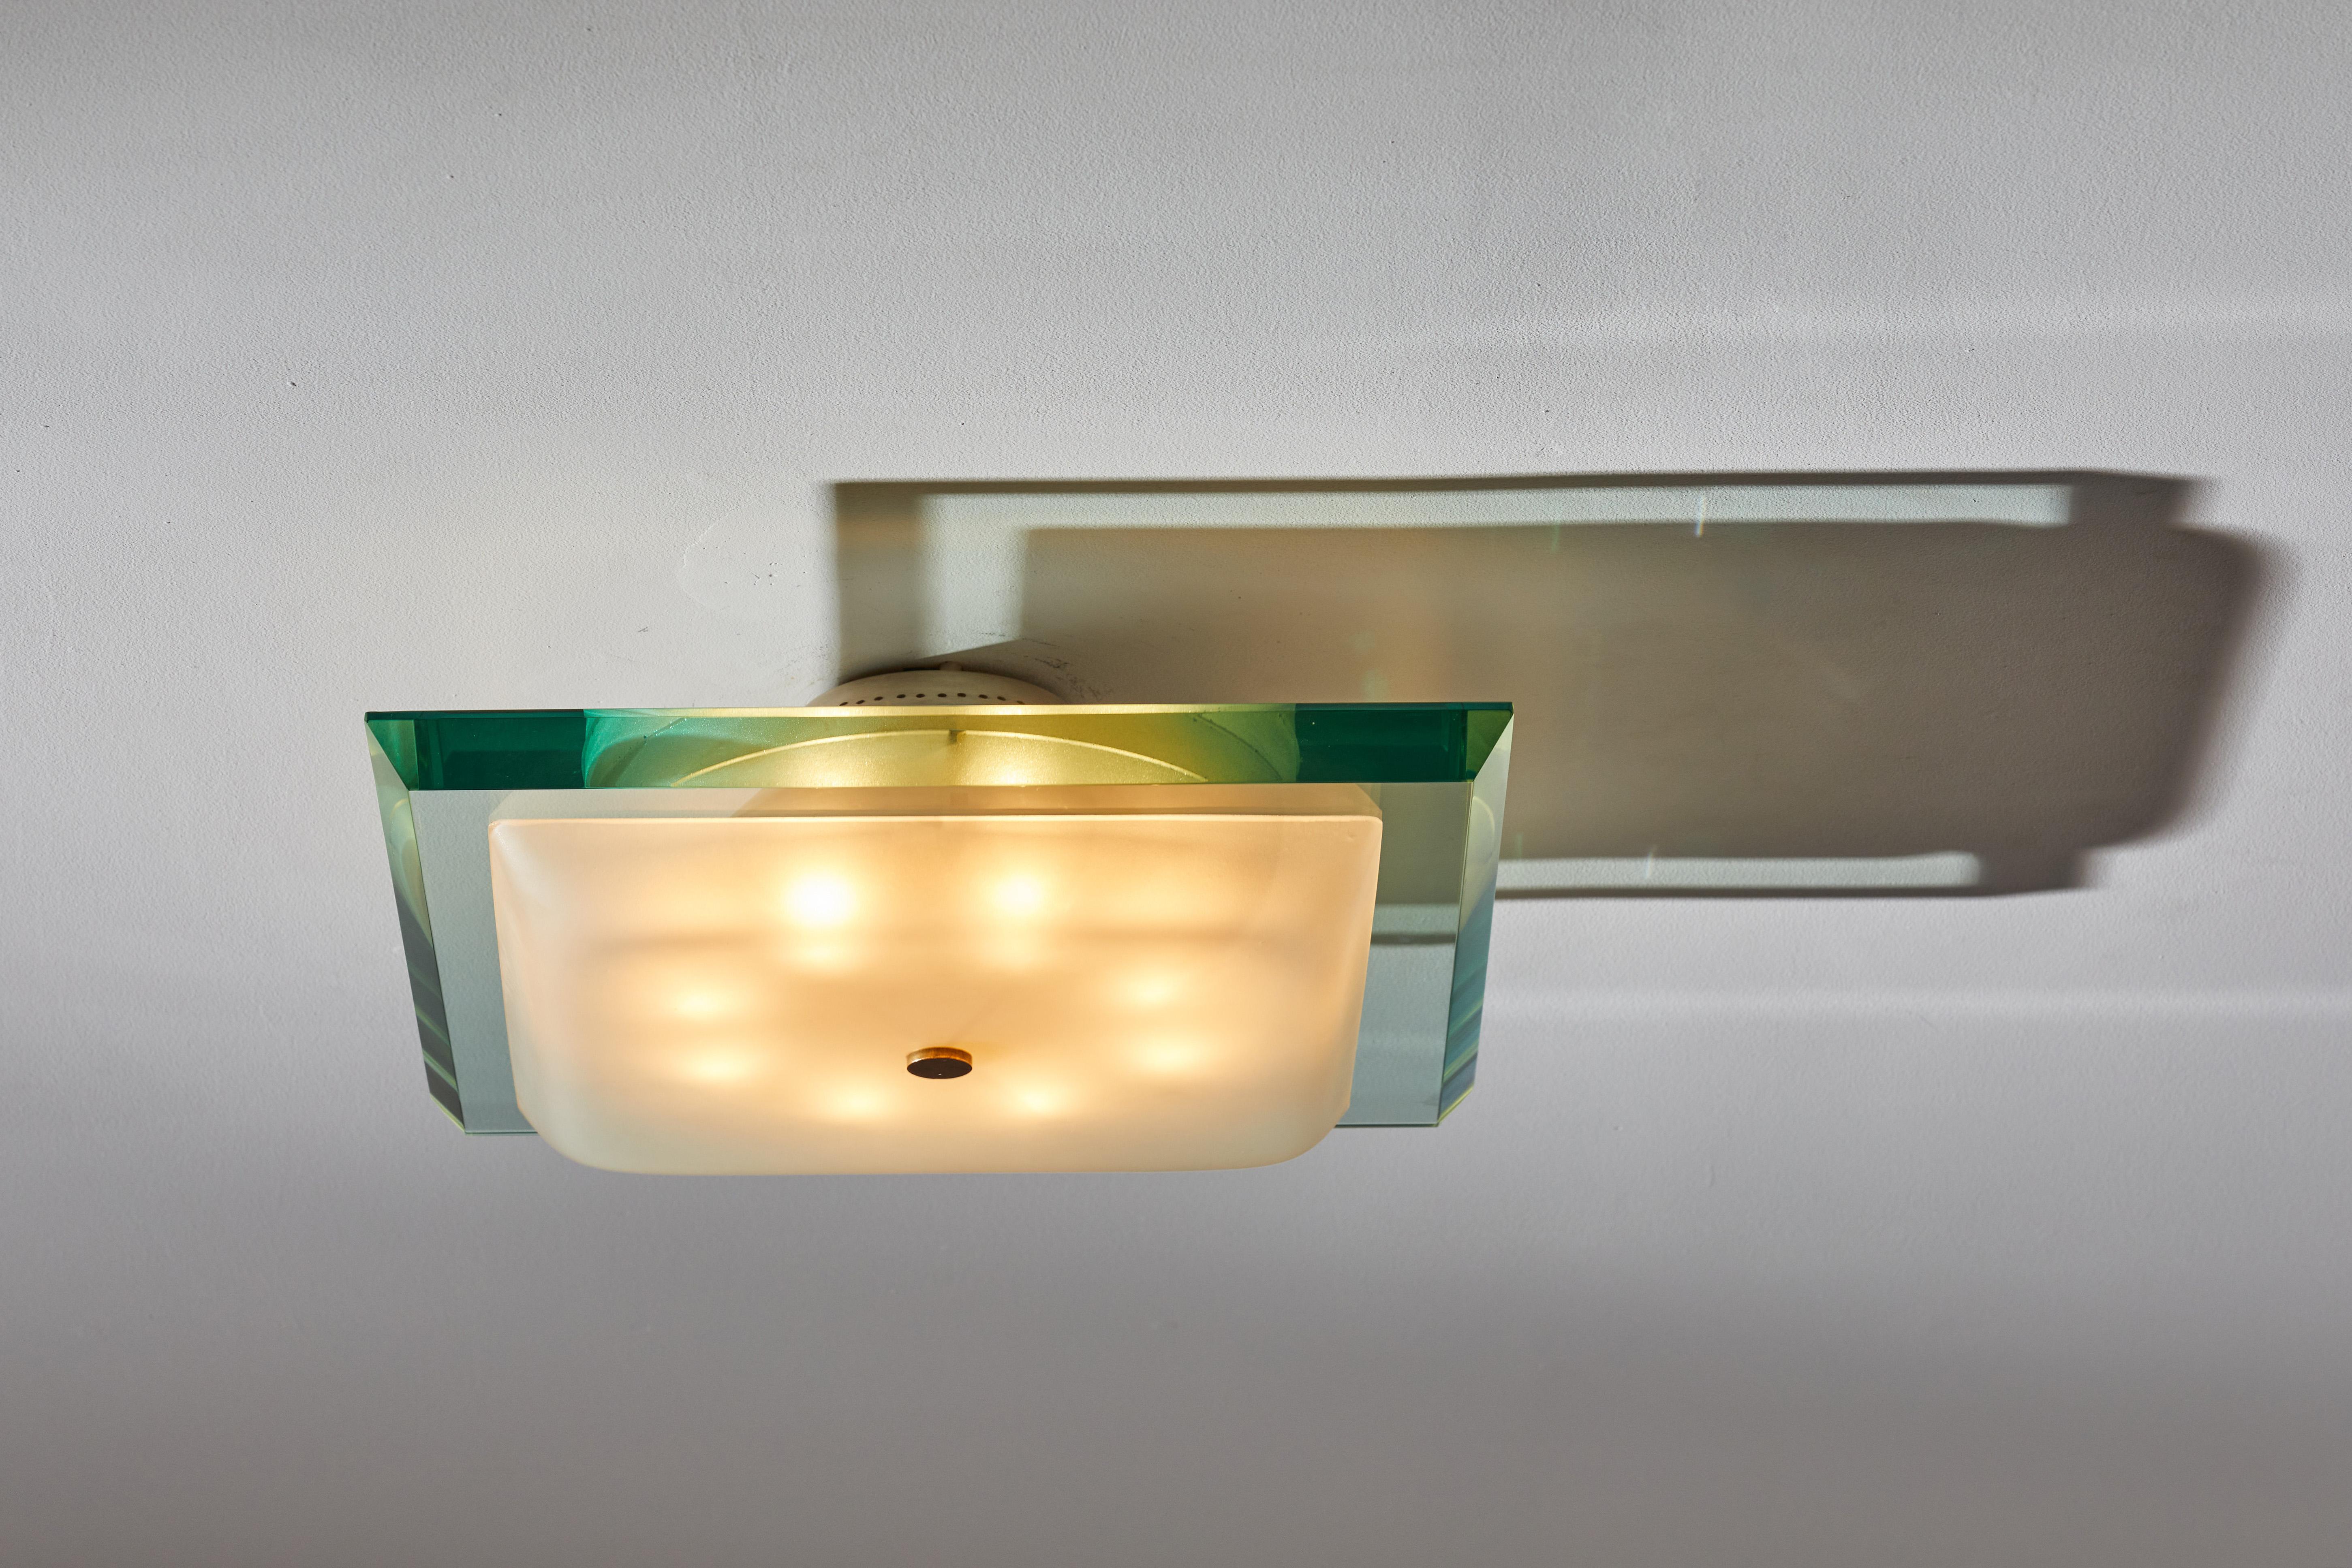 Model 1990 Flush Mount Ceiling Light by Max Ingrand for Fontana Arte. Designed and manufactured in Italy, circa 1960s. Glass, enameled metal, brass finial. Rewired for U.S. junction boxes. Takes eight E27 25w maximum bulbs. Bulbs provided as a one